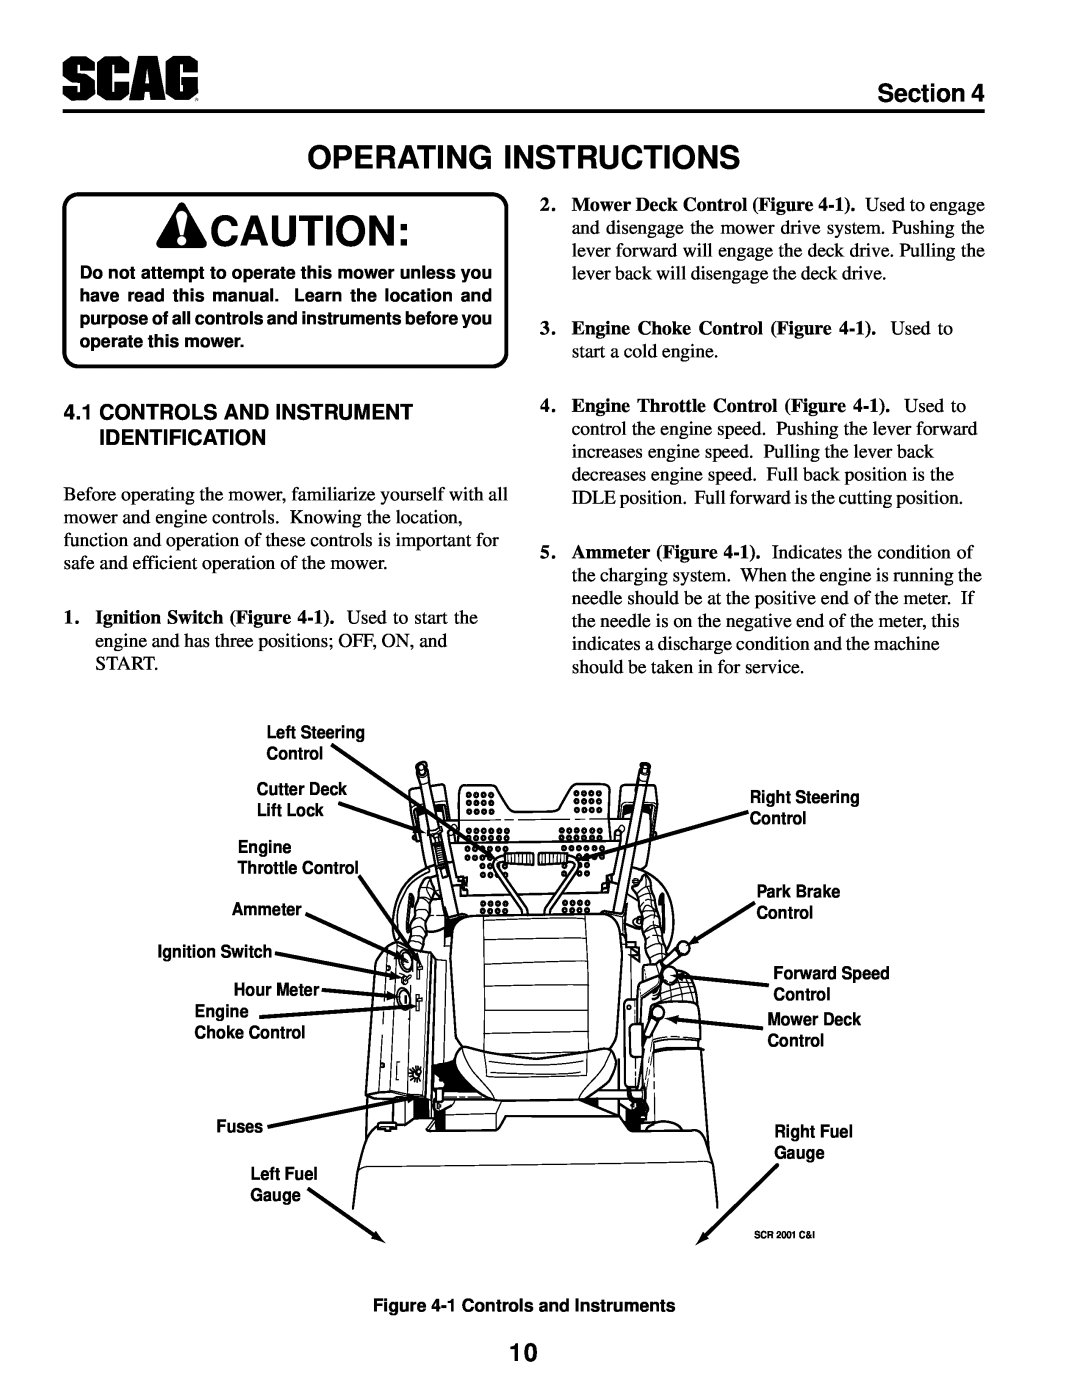 MB QUART SCR manual Operating Instructions, Controls And Instrument Identification, Section 